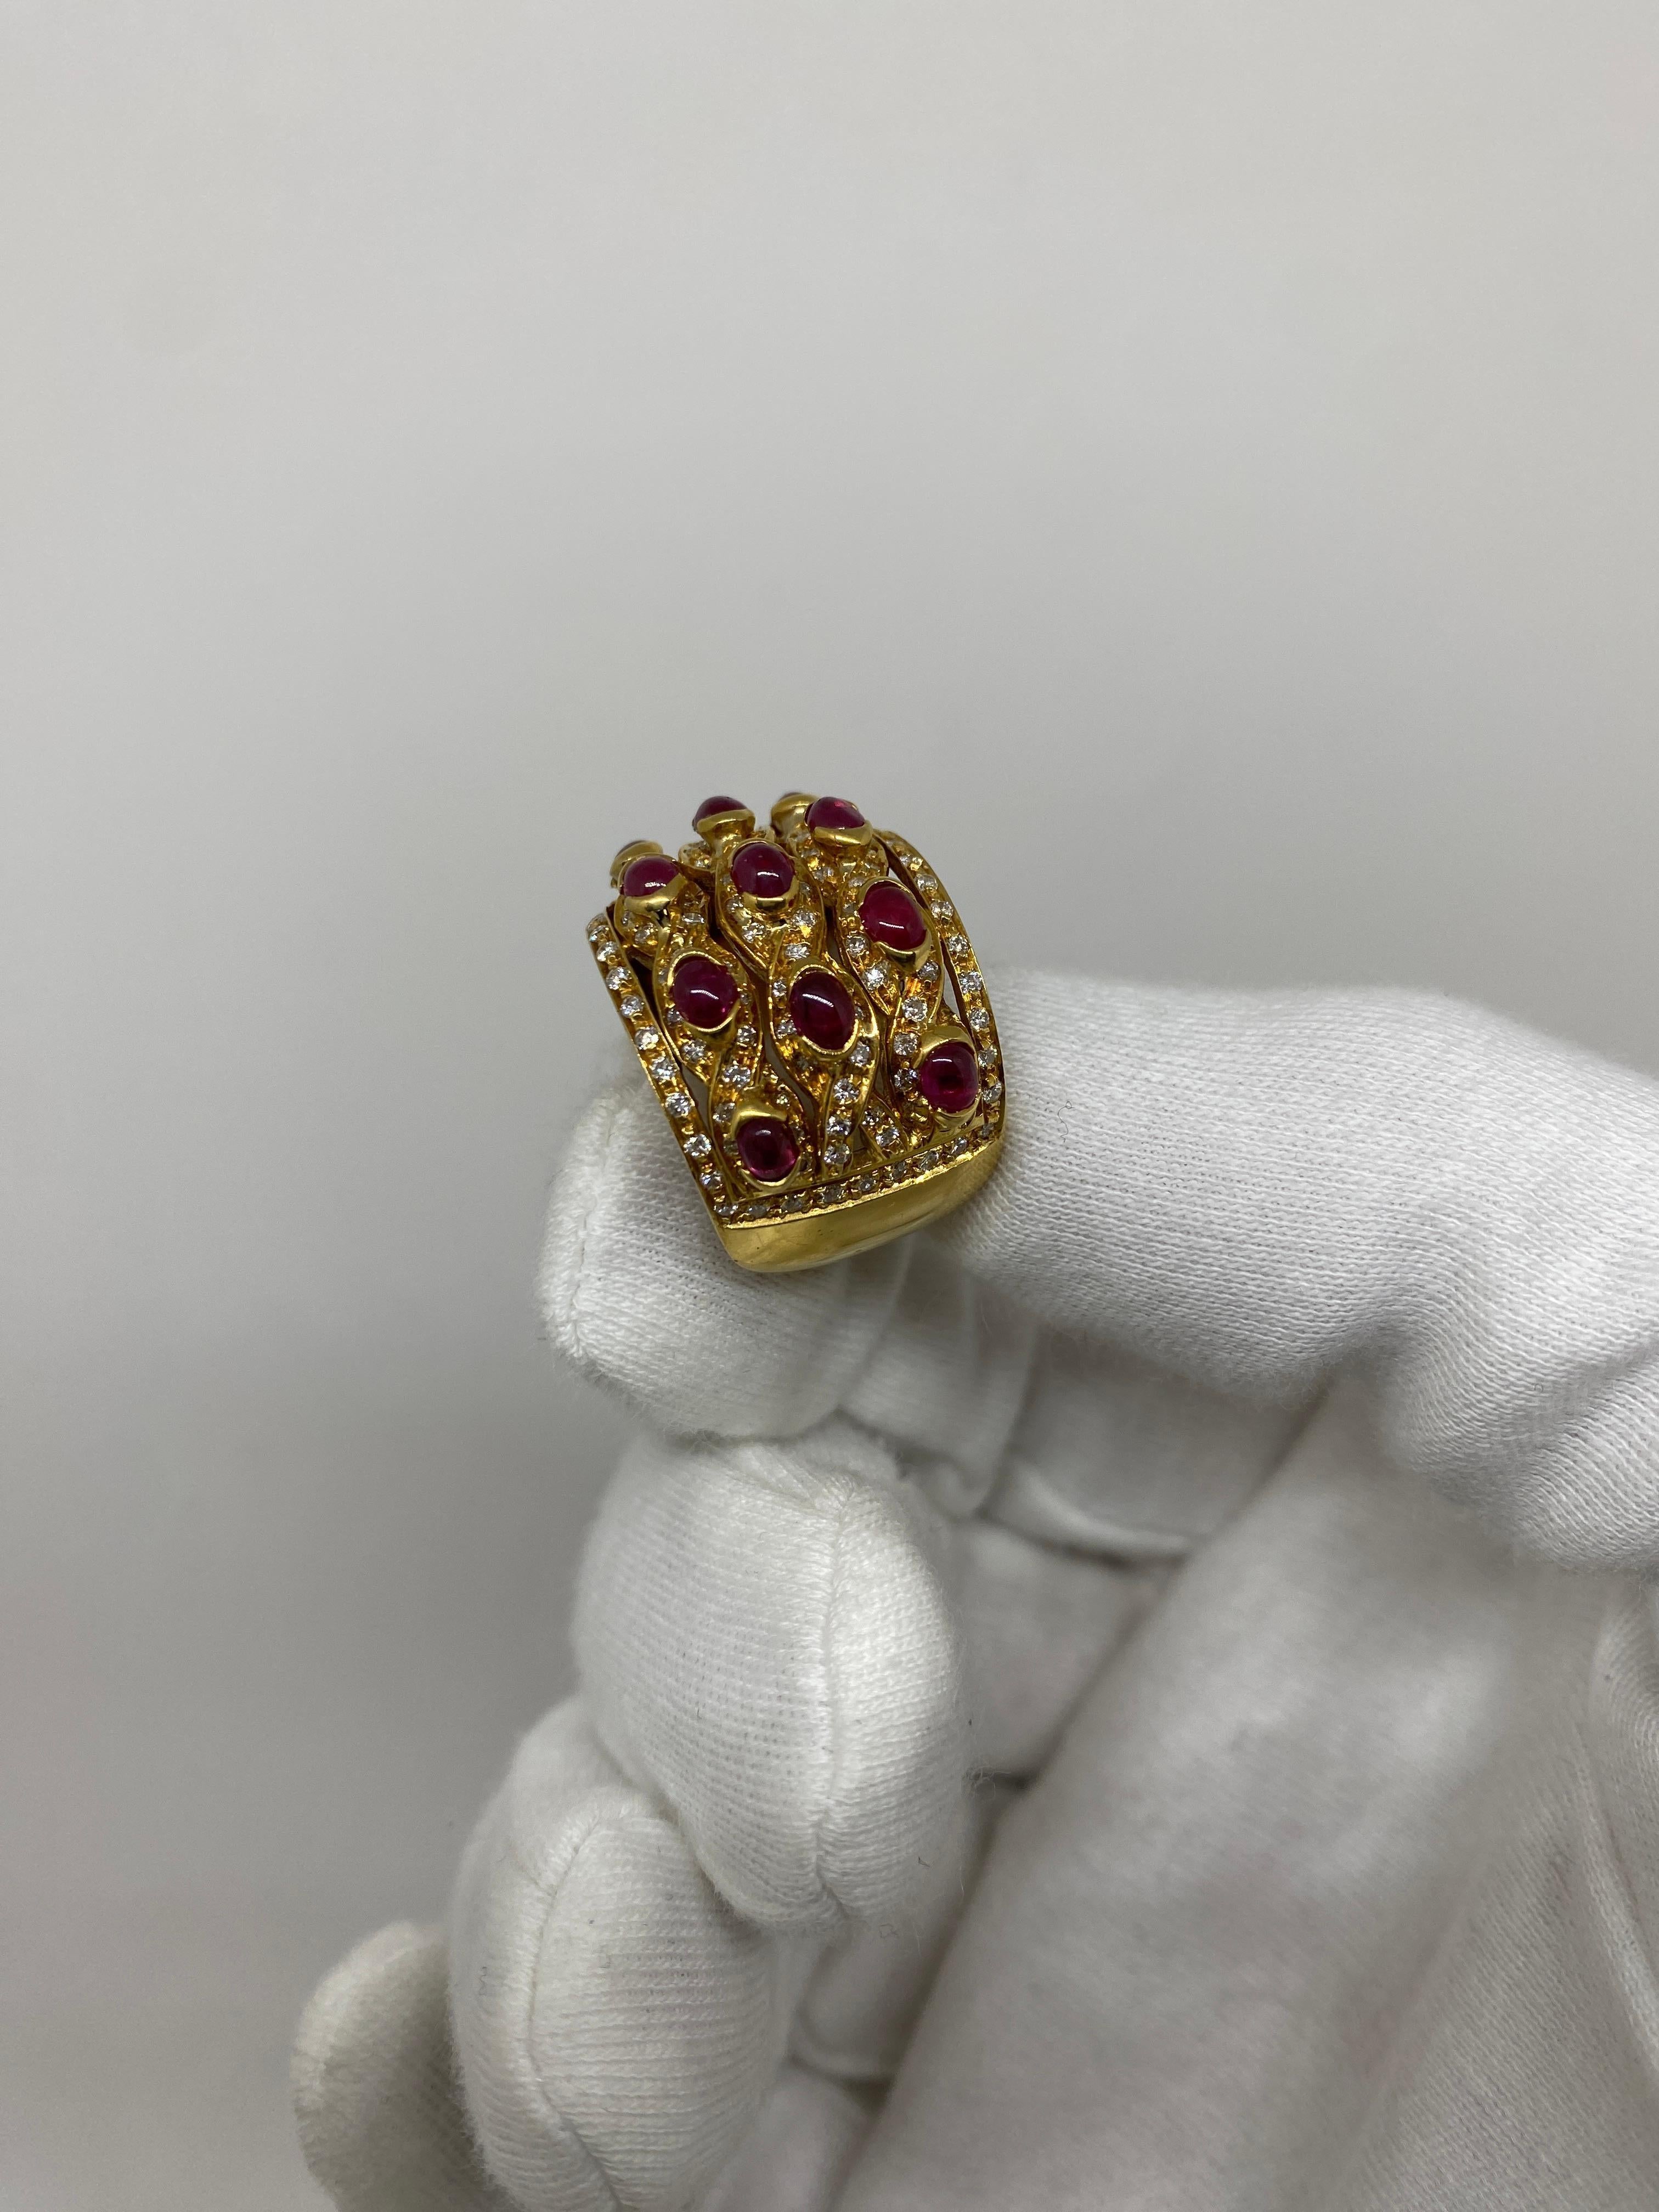 Ring made of 18kt yellow gold with natural brilliant-cut diamonds for ct.2.16 and natural red cabochon-cut rubies for ct.4.40

Welcome to our jewelry collection, where every piece tells a story of timeless elegance and unparalleled craftsmanship. As